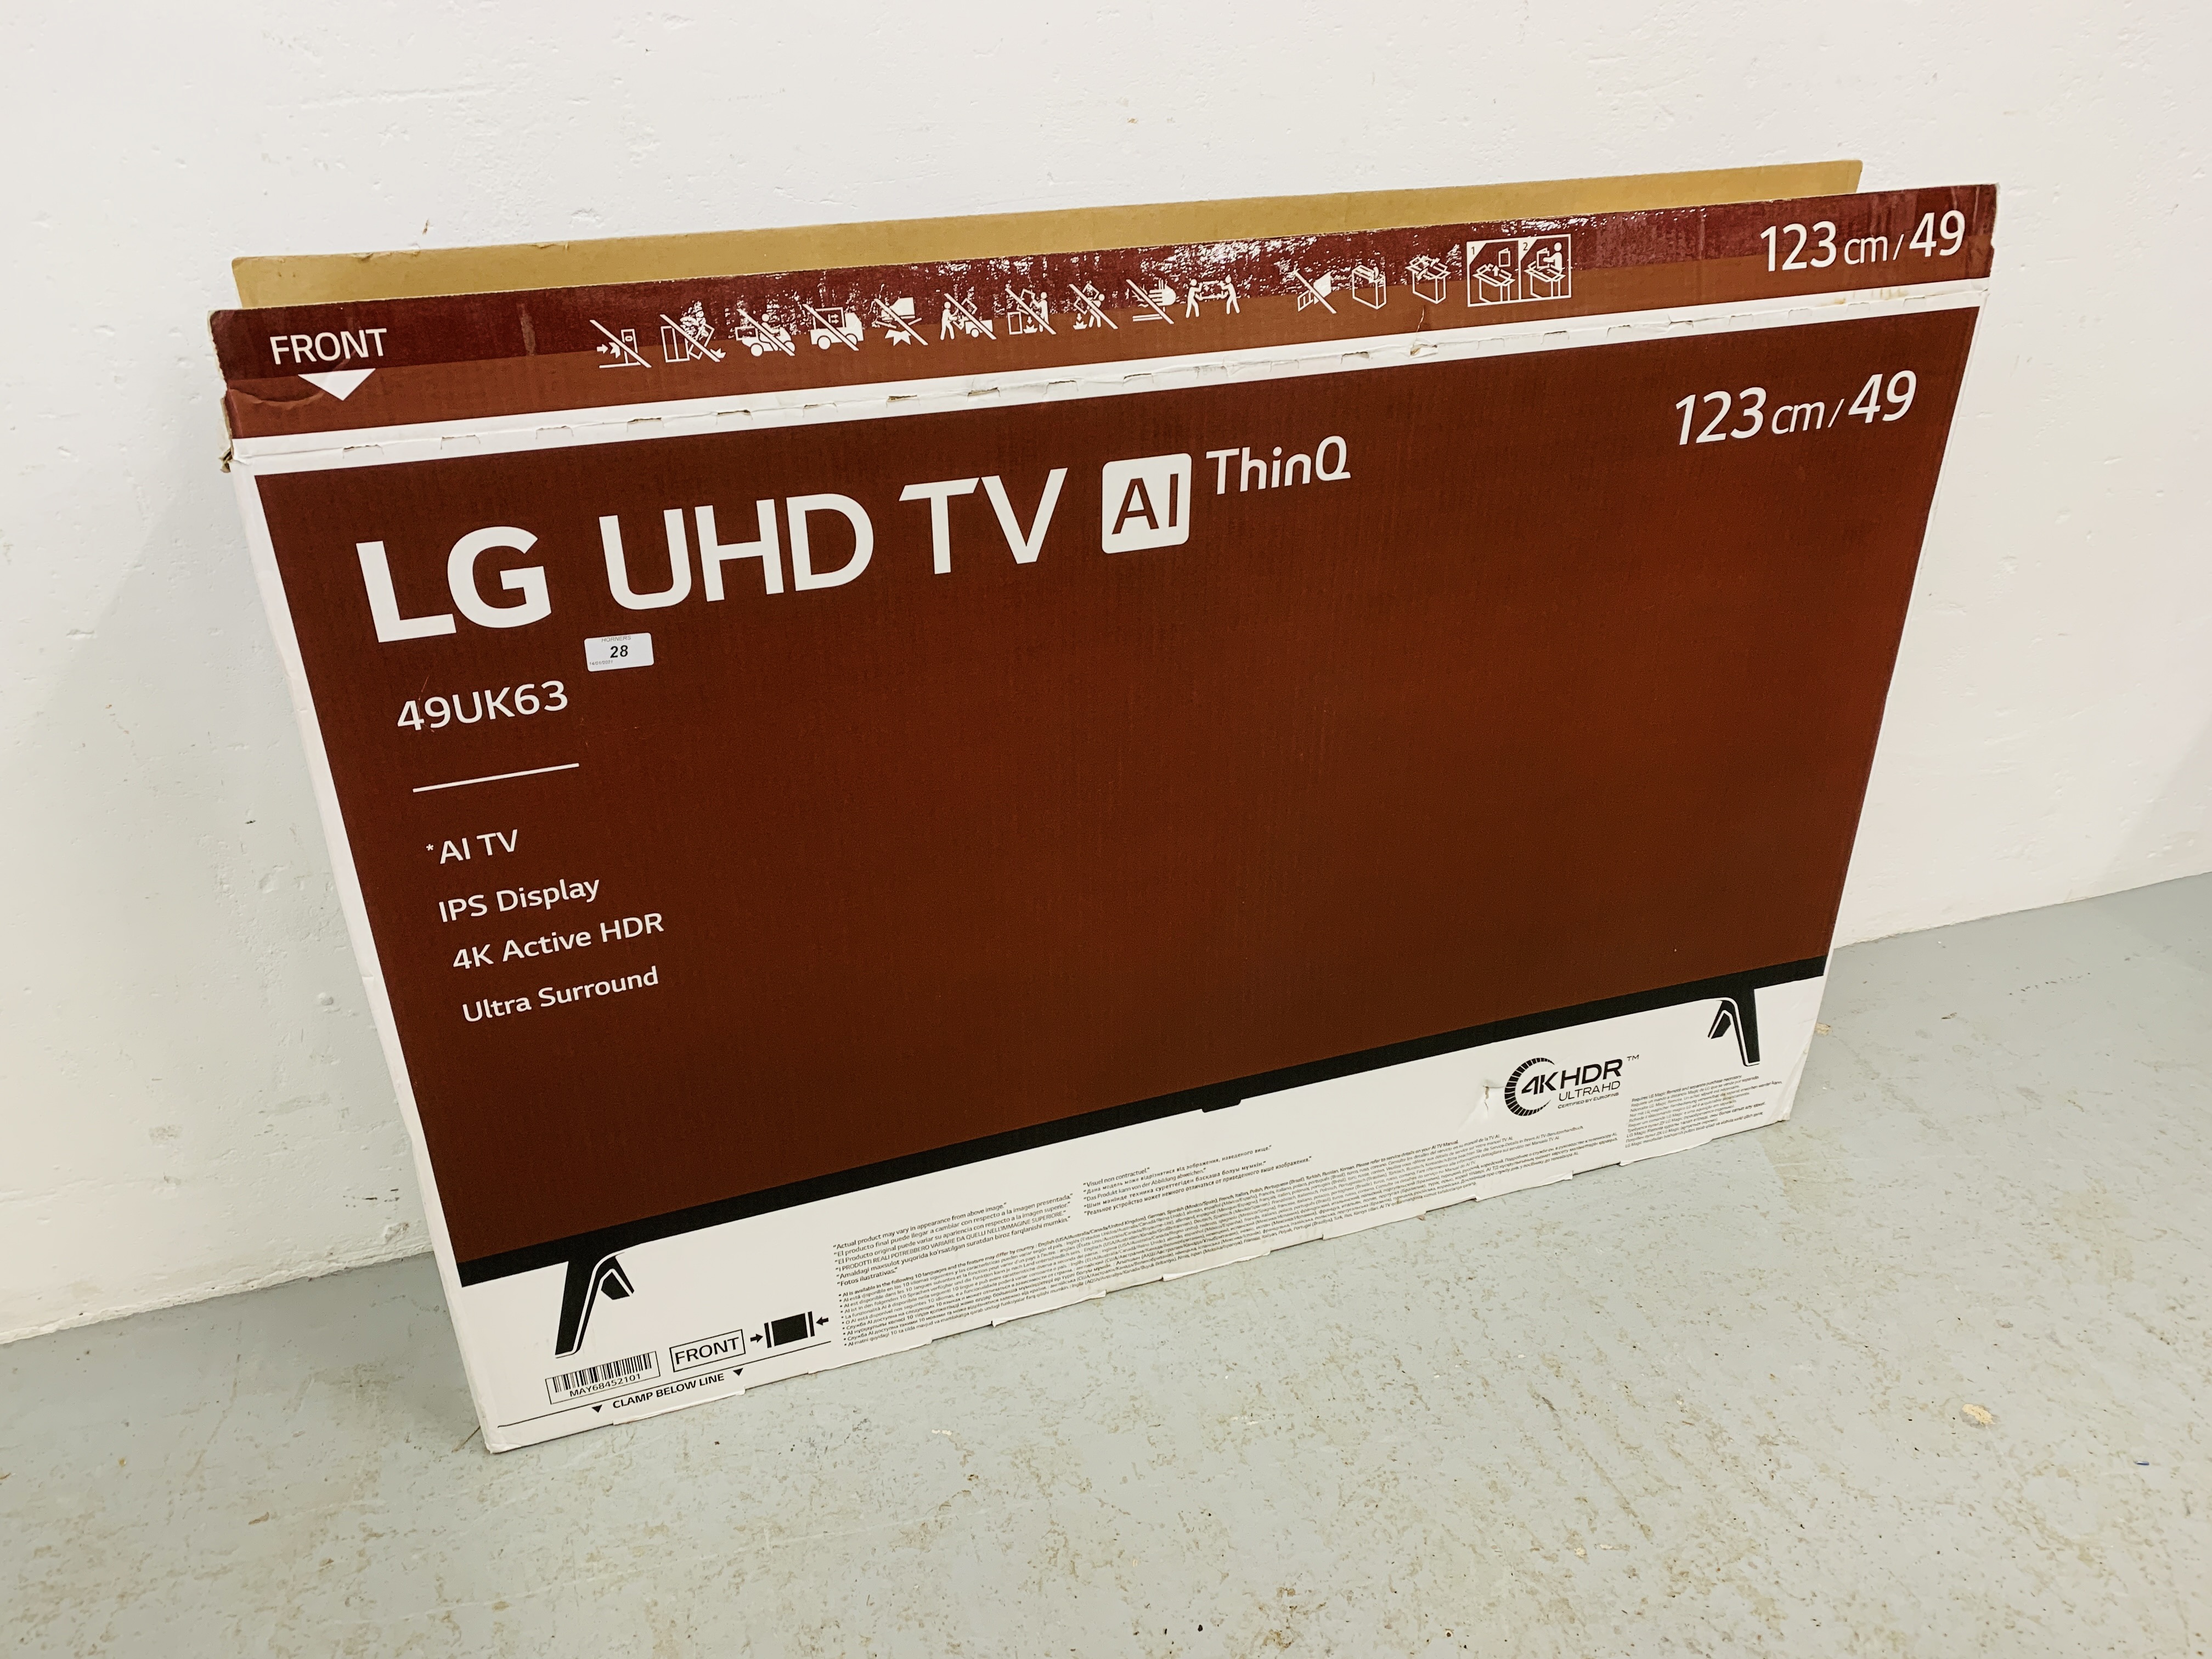 A LG VHD 49" A1 THIN Q TELEVISION MODEL 49VK63 WITH BOX AND INSTRUCTIONS - SOLD AS SEEN - Image 4 of 7